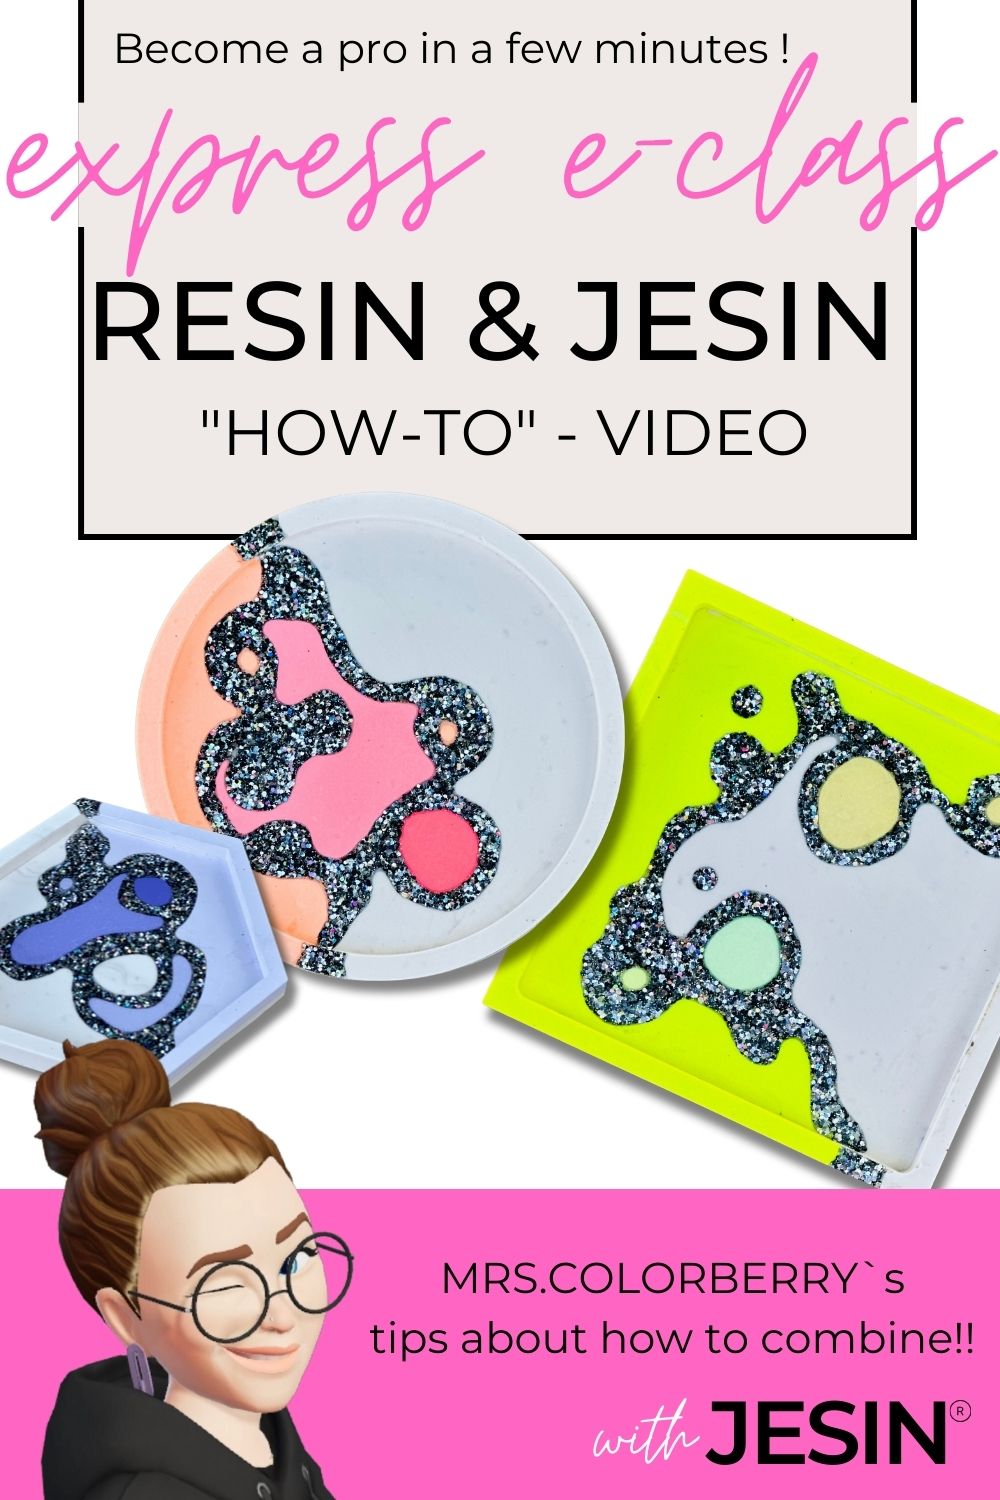 EXPRESS TICKET for JESIN & RESIN combinations